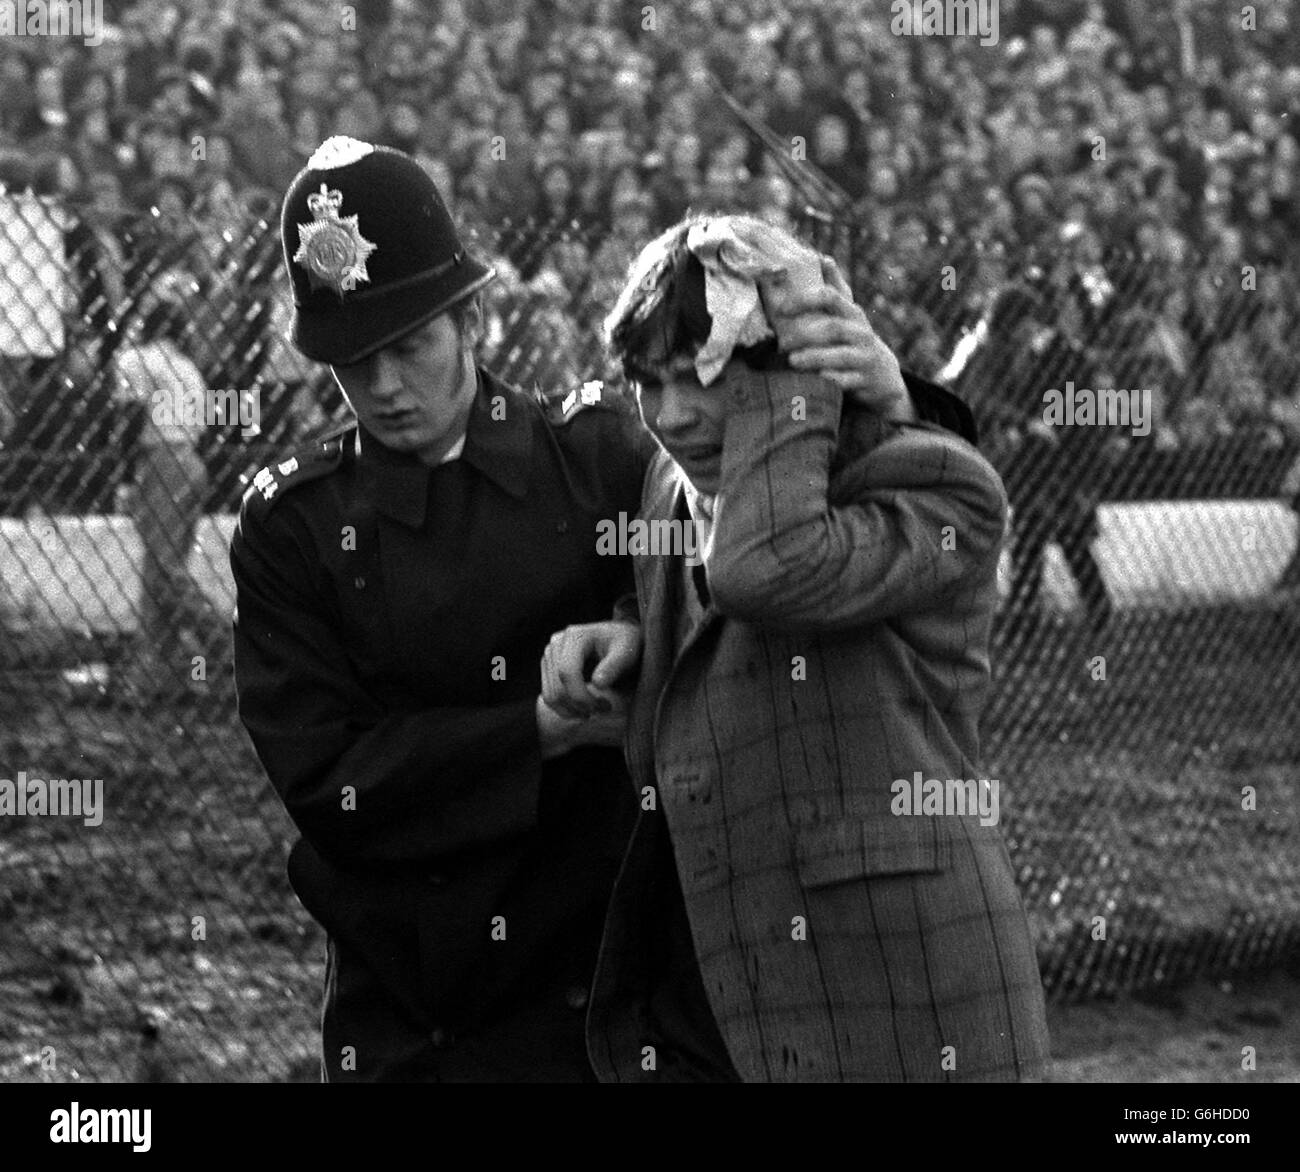 Police in Action at Chelsea. A Policeman escorts a young fan nursing an injured head at Stamford Bridge, where rioting spectators spilled over the barriers before the start of Chelsea's League Division Two promotion battle against London rivals Millwall. Stock Photo